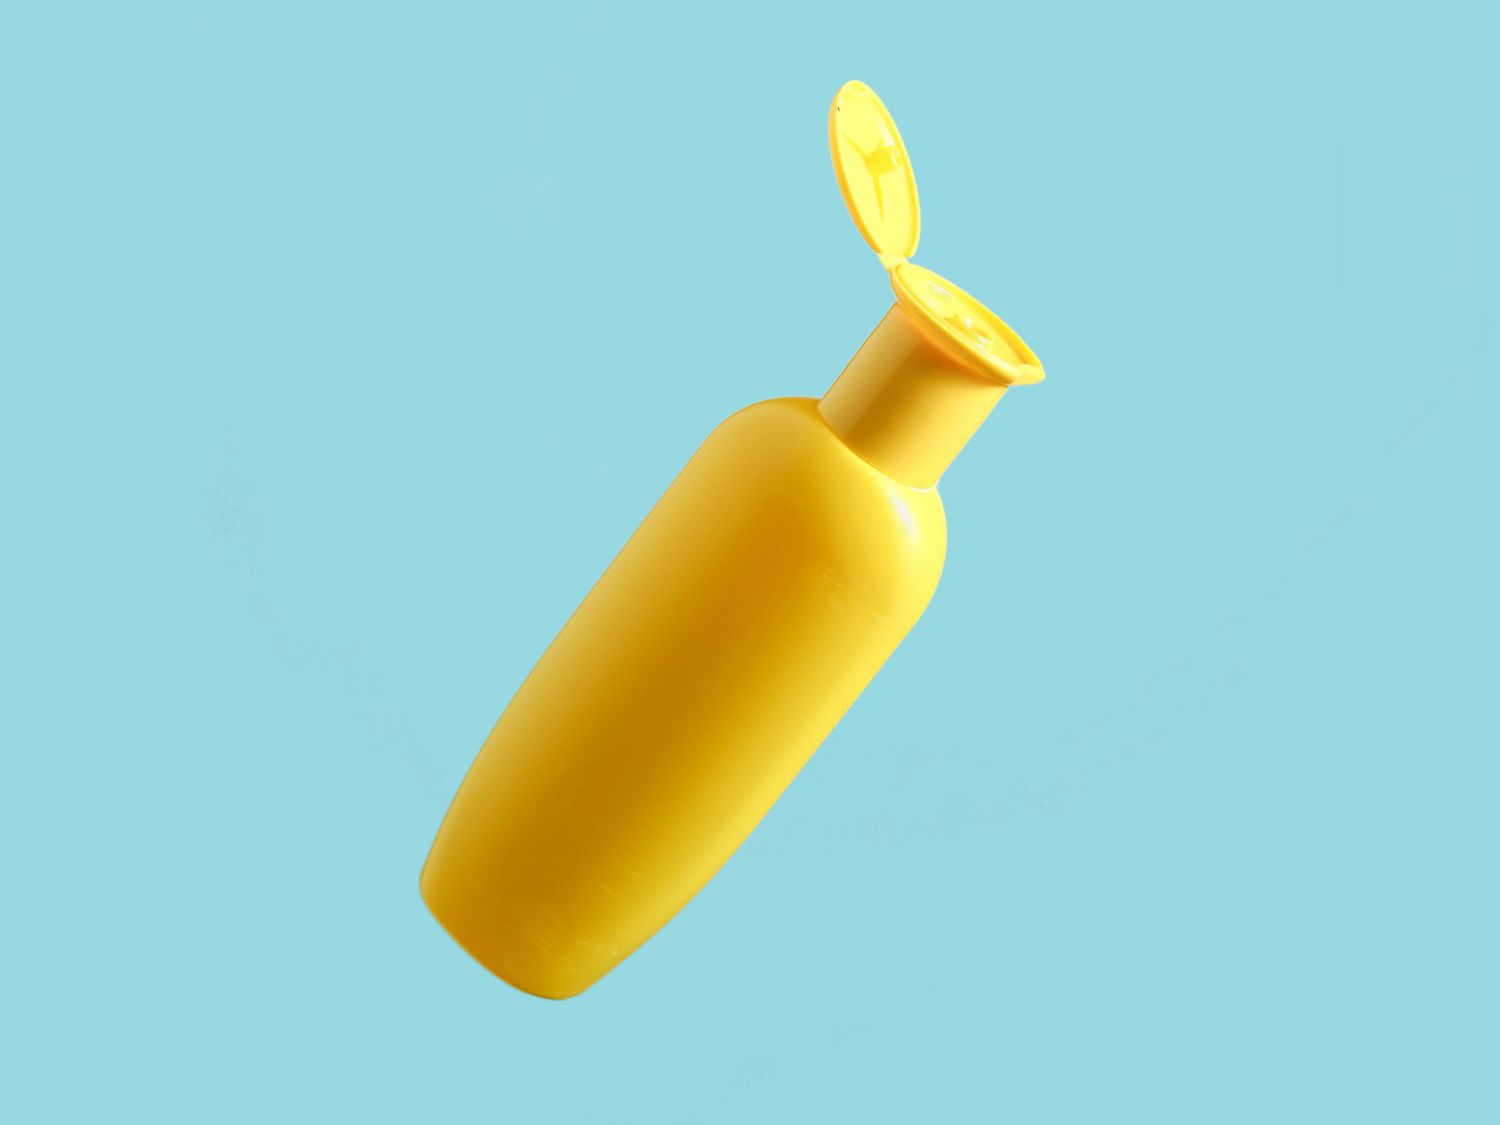 Yellow bottle of shower gel on blue background. Minimalism, conceptual photo, photo with shadow.